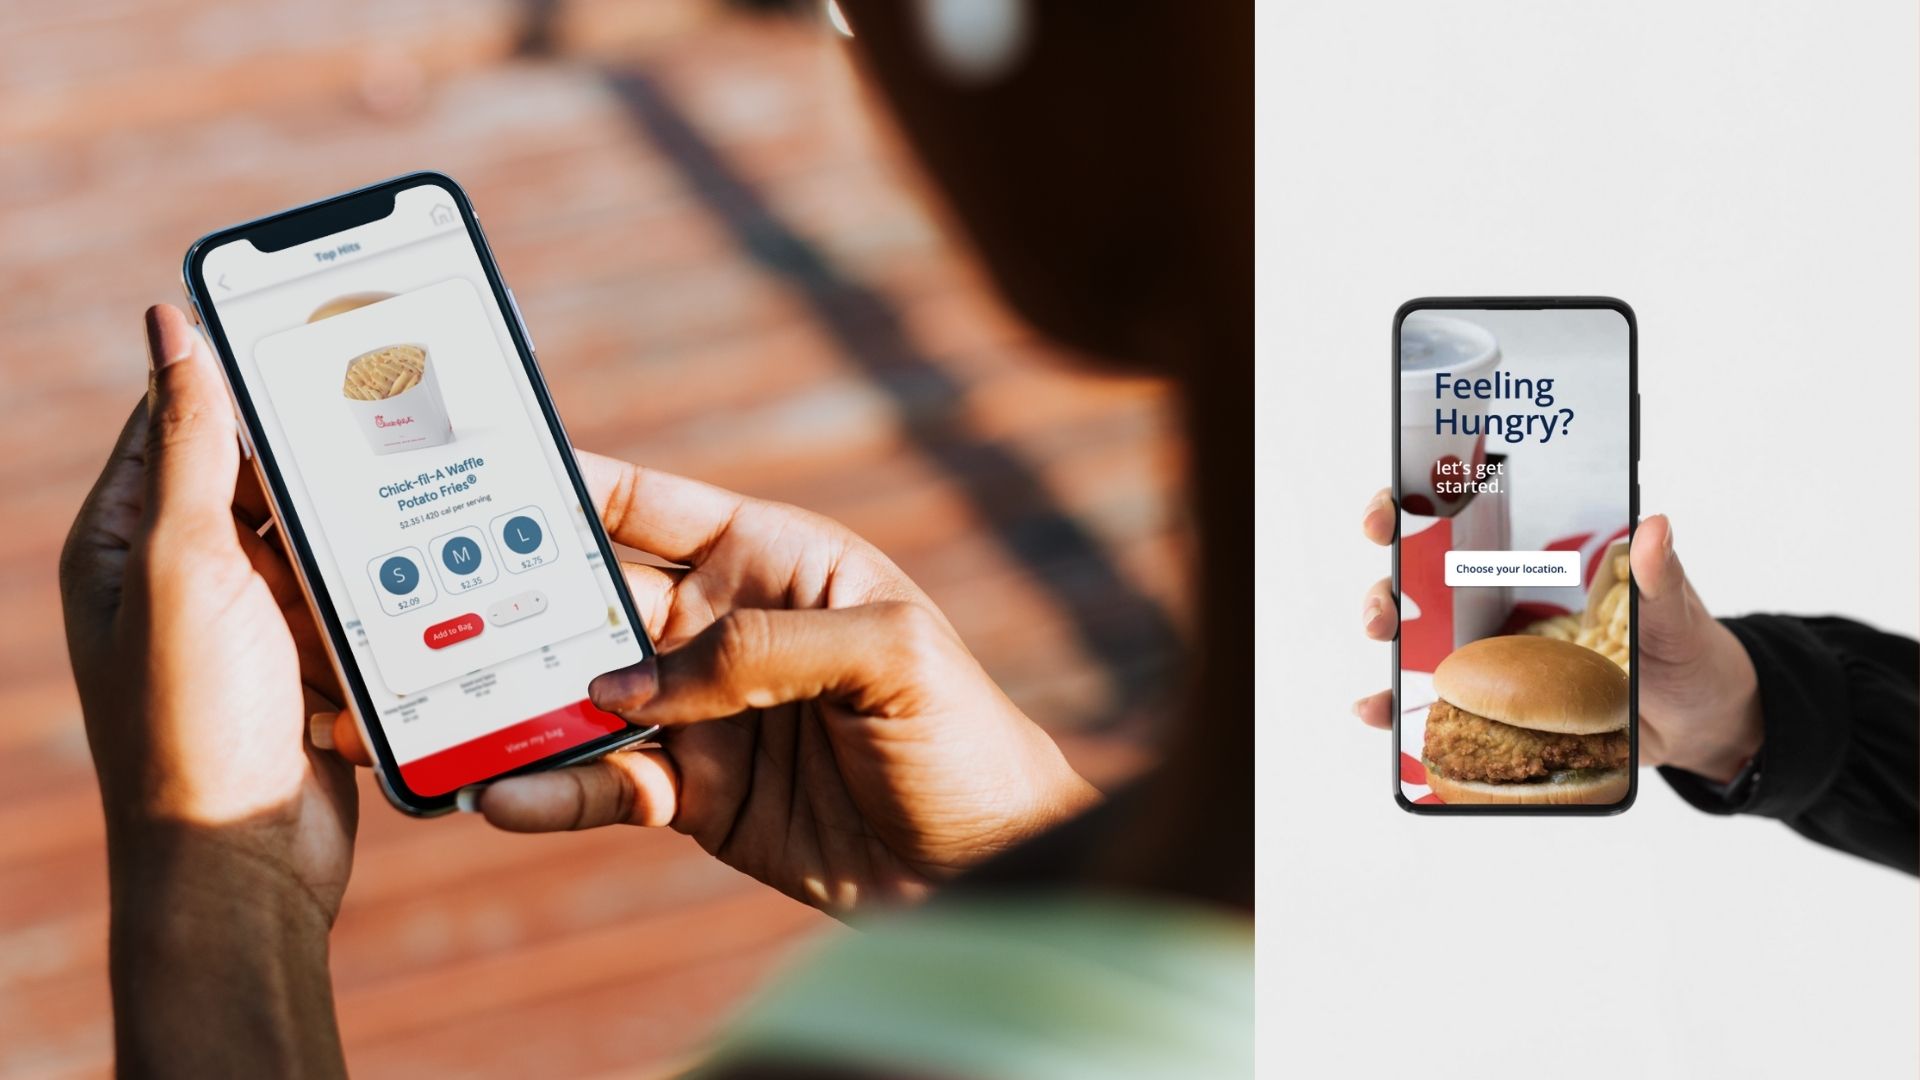 "Chick-fil-a App," UX/UI Design / "Chick-fil-a App," UX/UI Design, 1792 x 828 px figma file, 2022. This is a user-friendly App designed chick-fil-a that is targeted at their key-demographic. It is easy-to-use and modern.